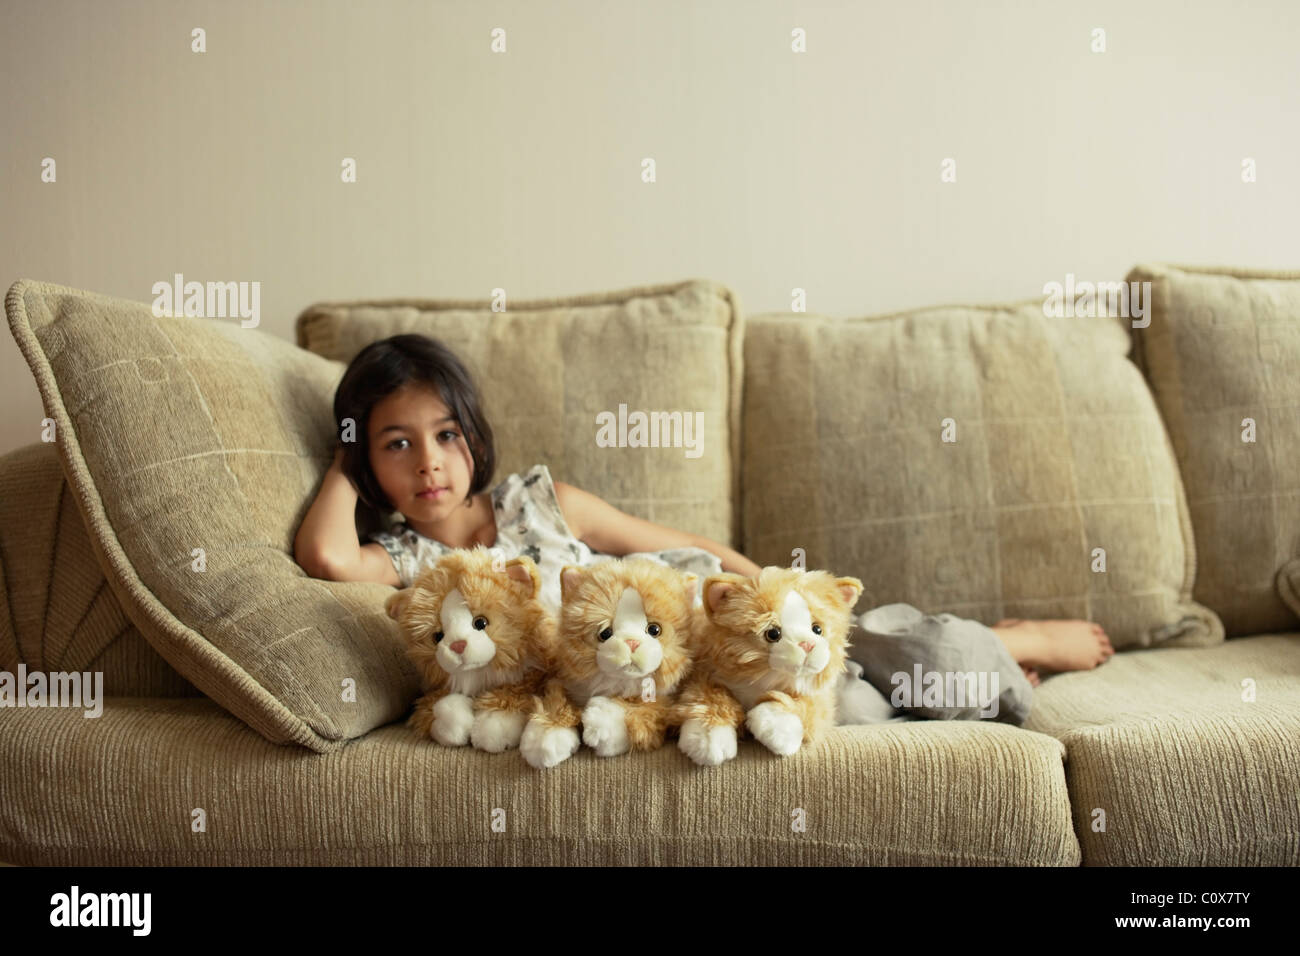 Girl on sofa with three fluffy toy kittens. Stock Photo